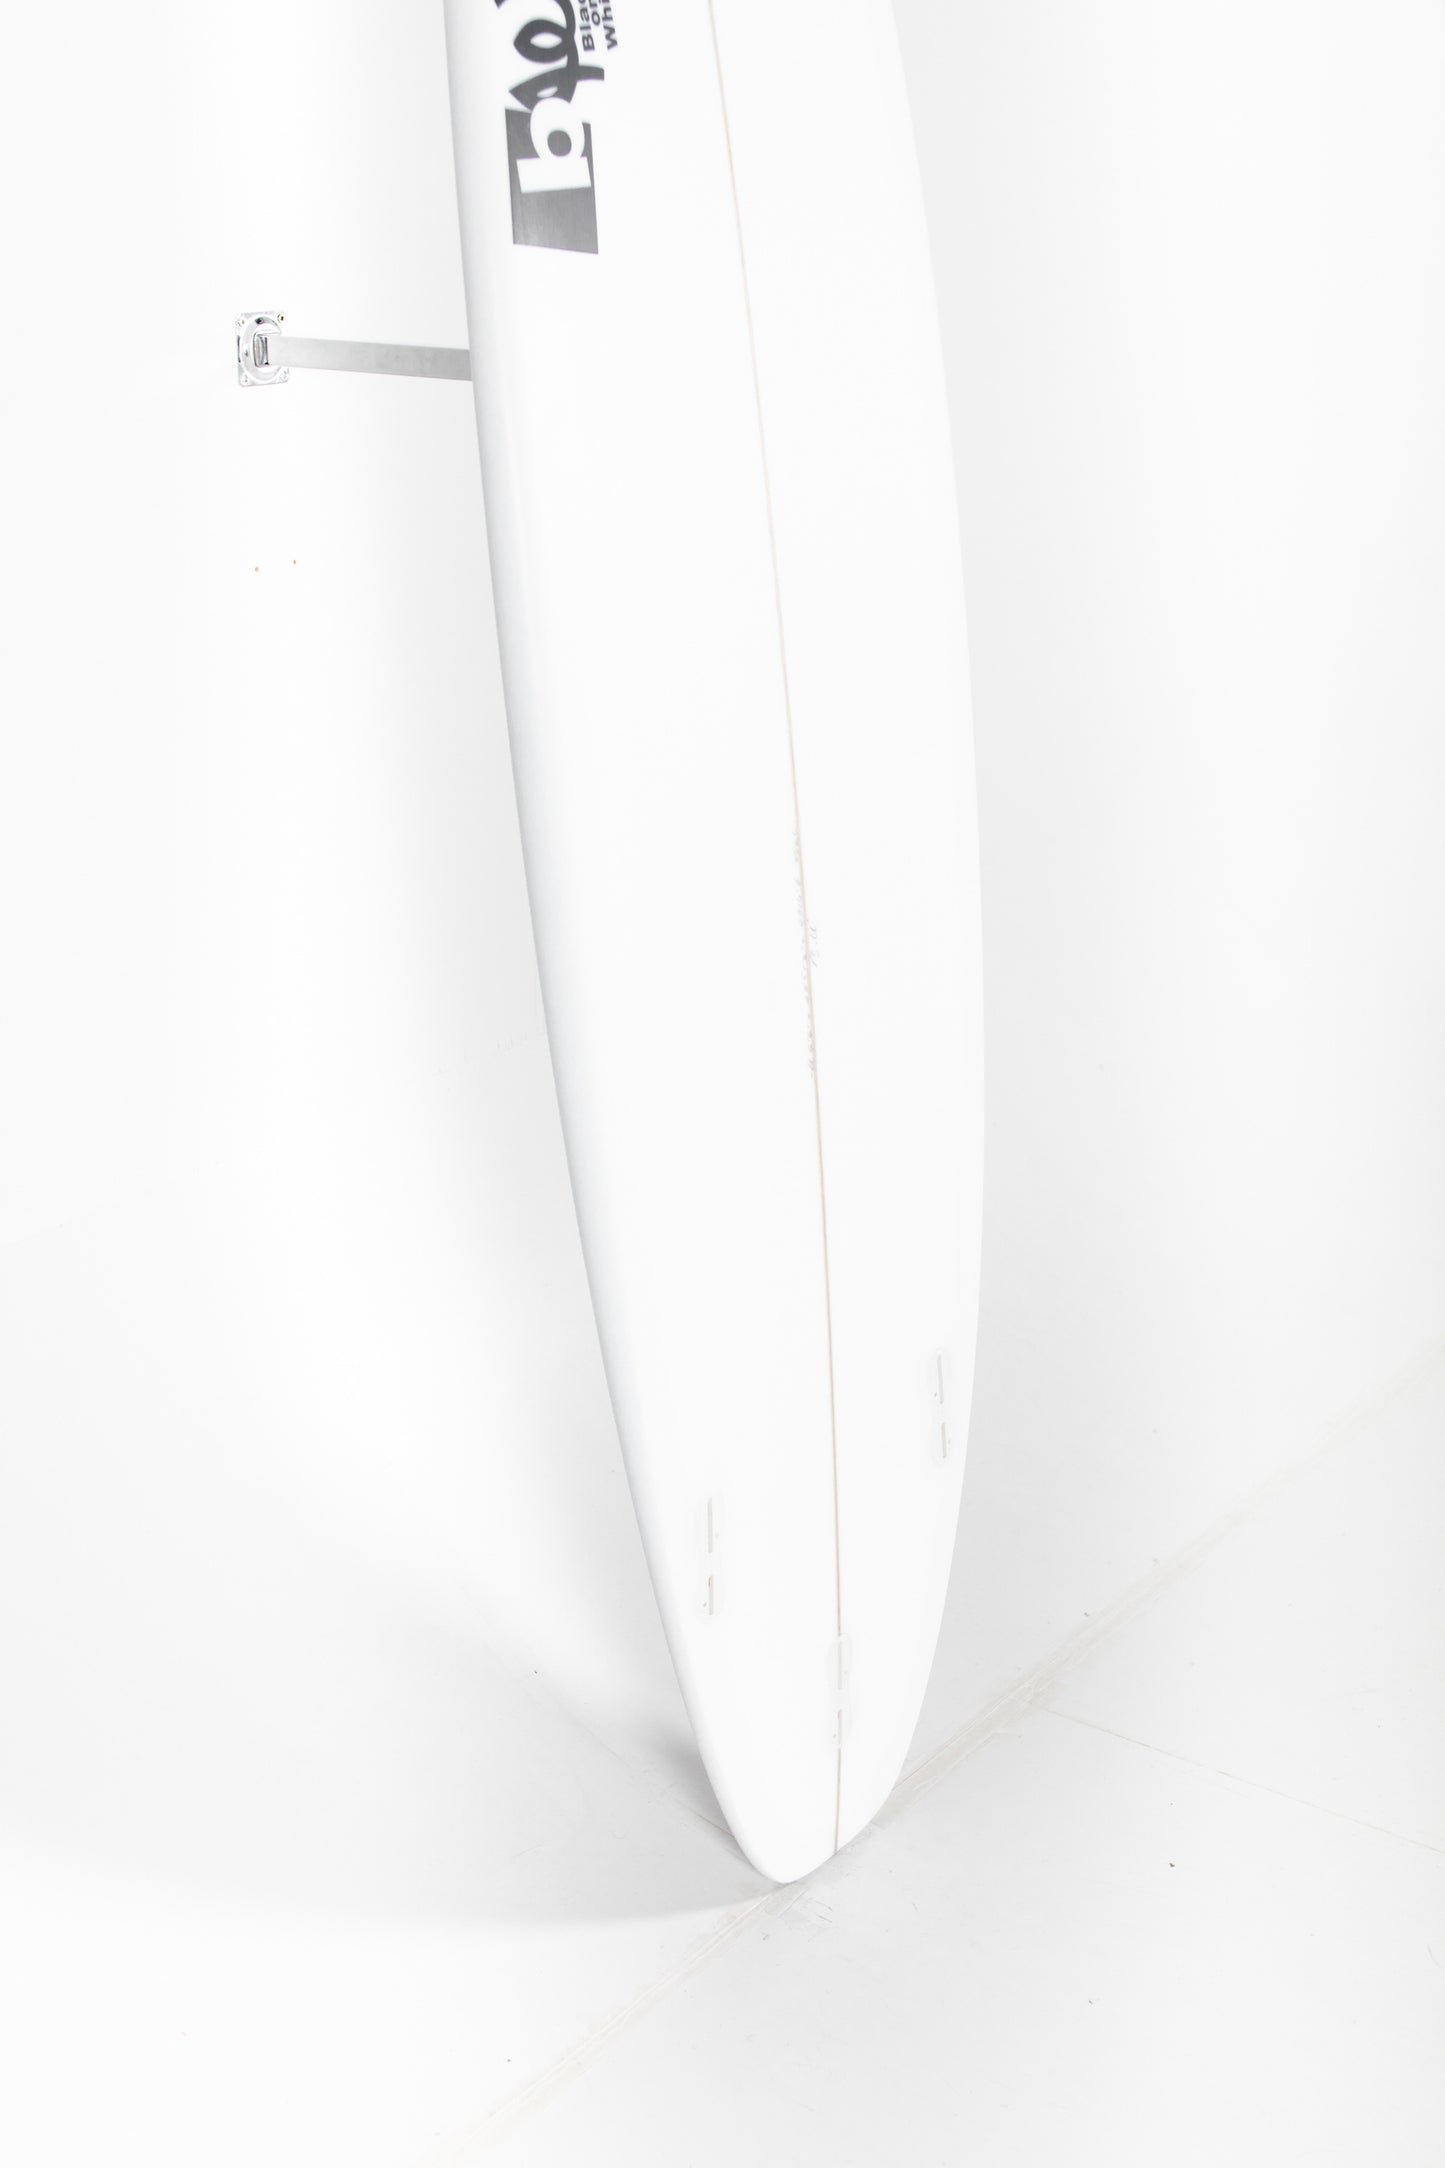 
                  
                    BW SURFBOARDS - BW SURFBOARDS Potato 6'6" x 22 5/8 x 2 3/4 x 49.6L. at PUKAS SURF SHOP
                  
                